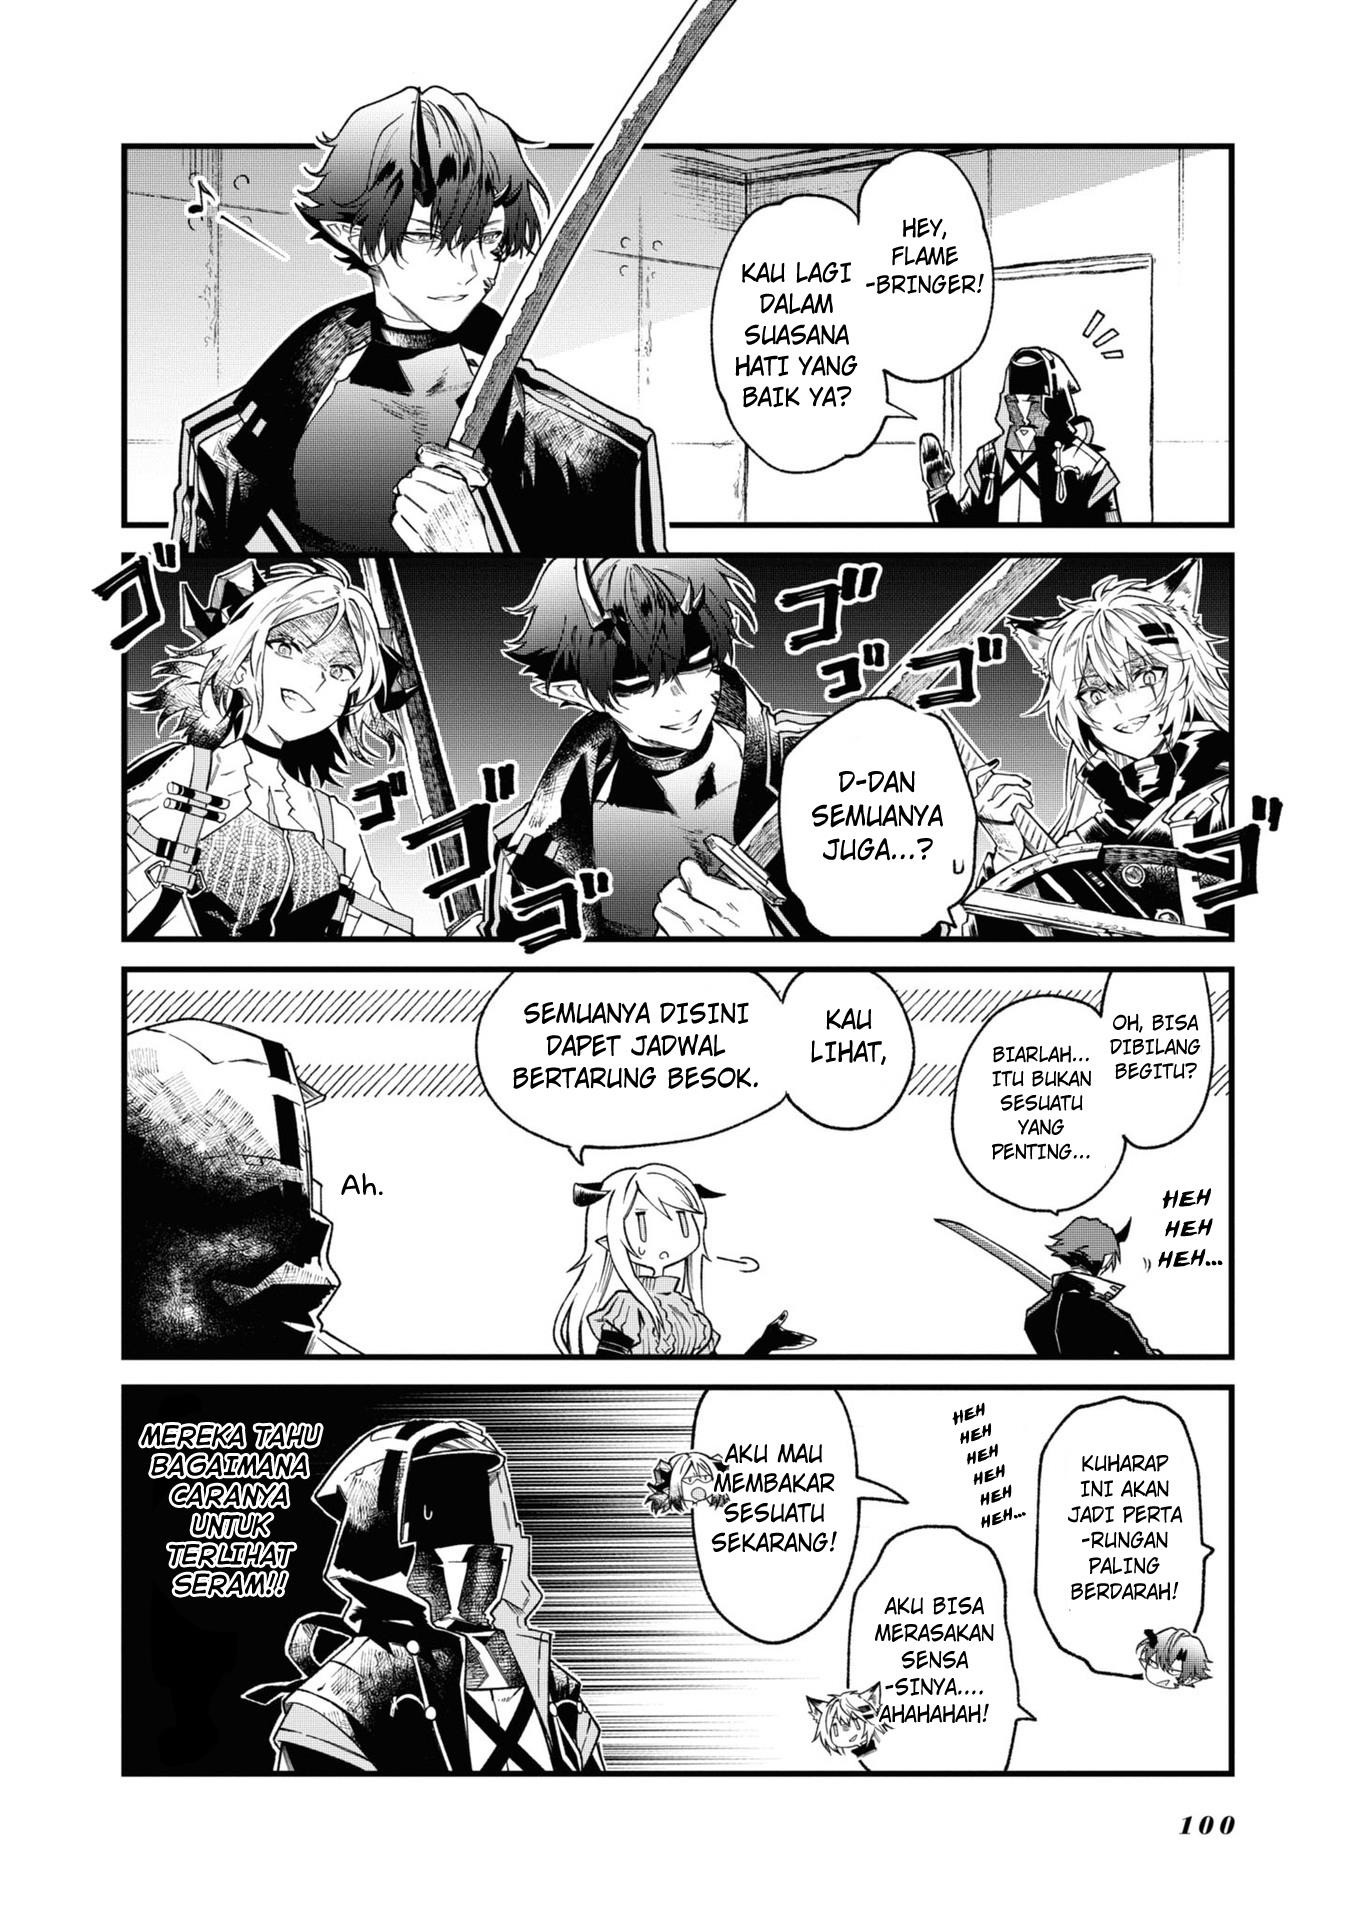 Arknights: OPERATORS! Chapter 19